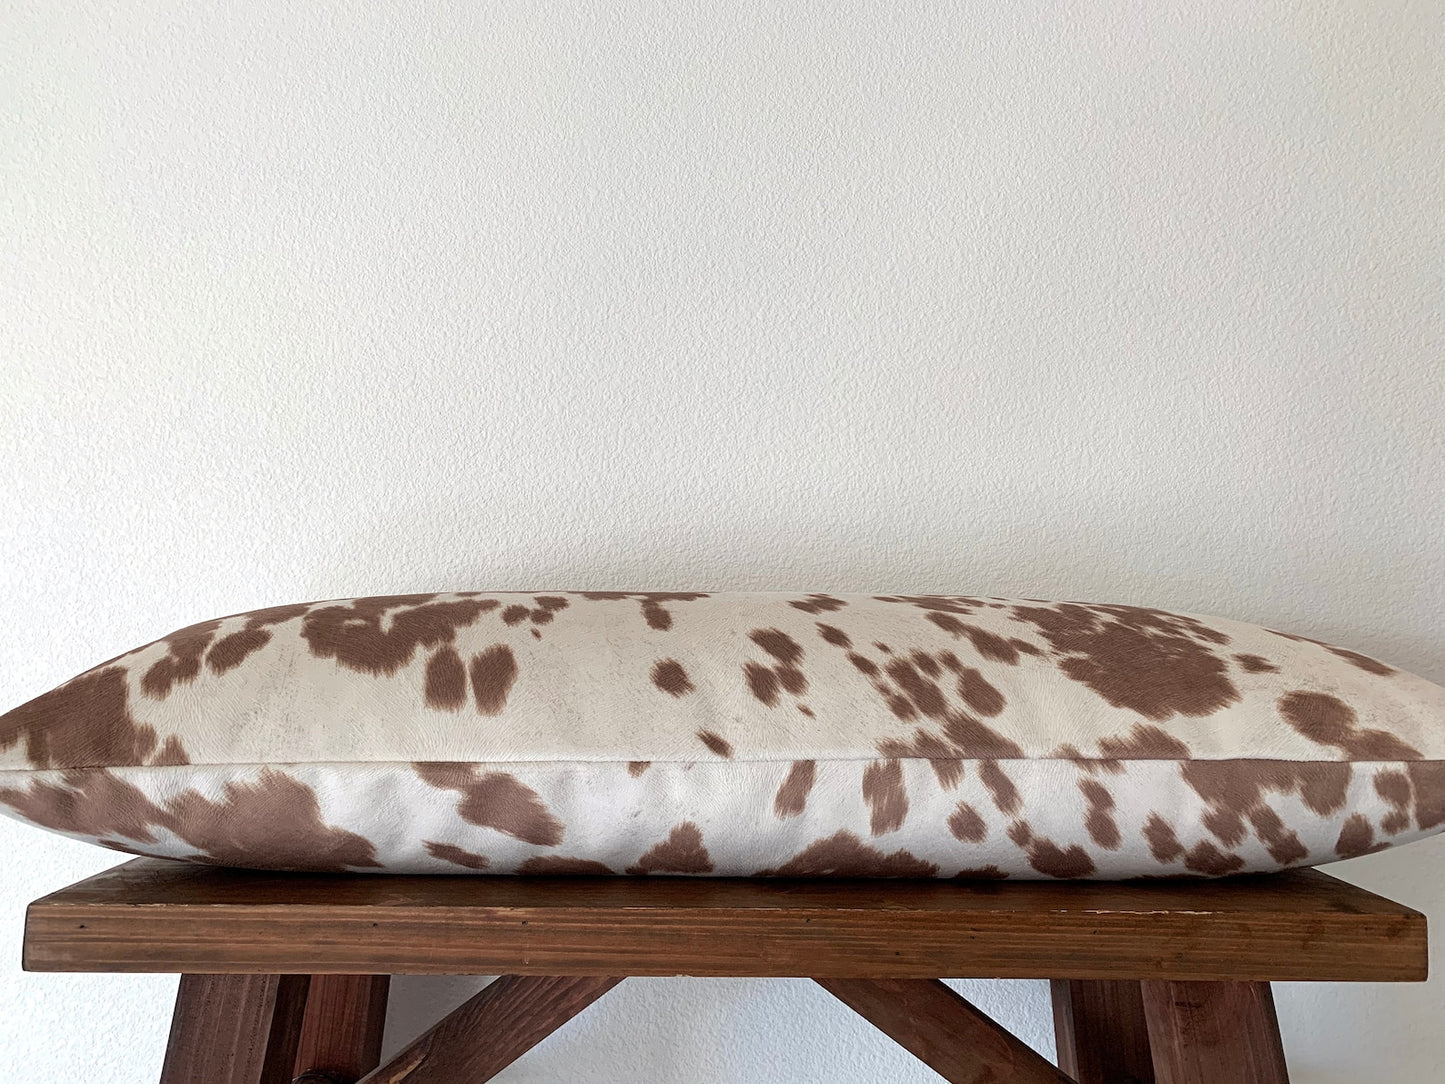 Modern West Texas Cowhide Pillow Cover  in Dirty Blonde - Vegan Suede Textured Pillow Cover / Available in Lumbar, Bolster, Throw, Euro Sham Sizes